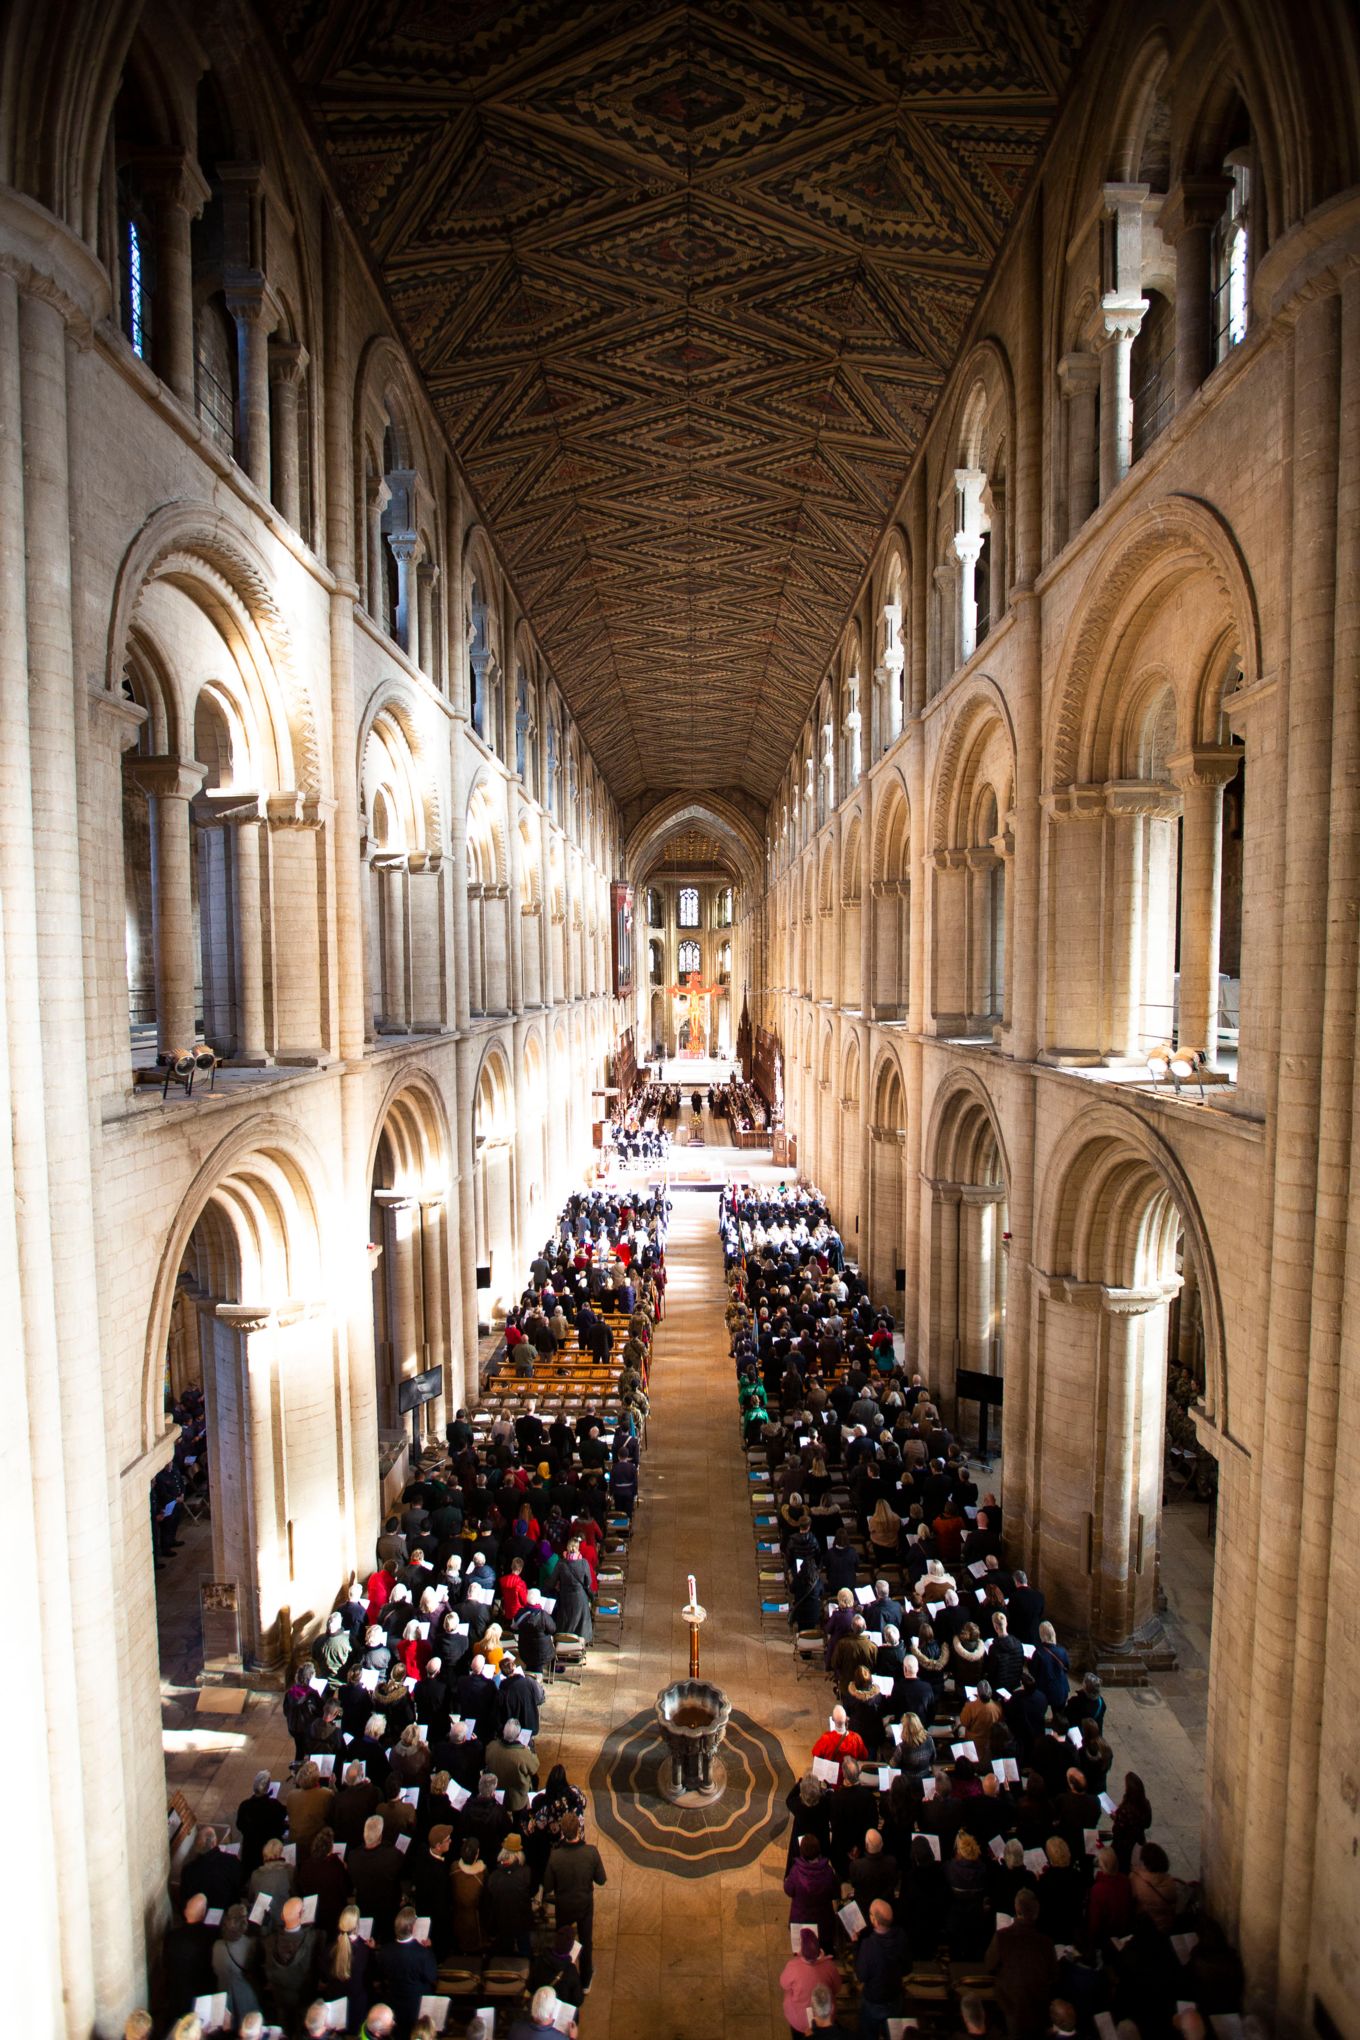 The service of Remembrance in Peterborough Cathedral